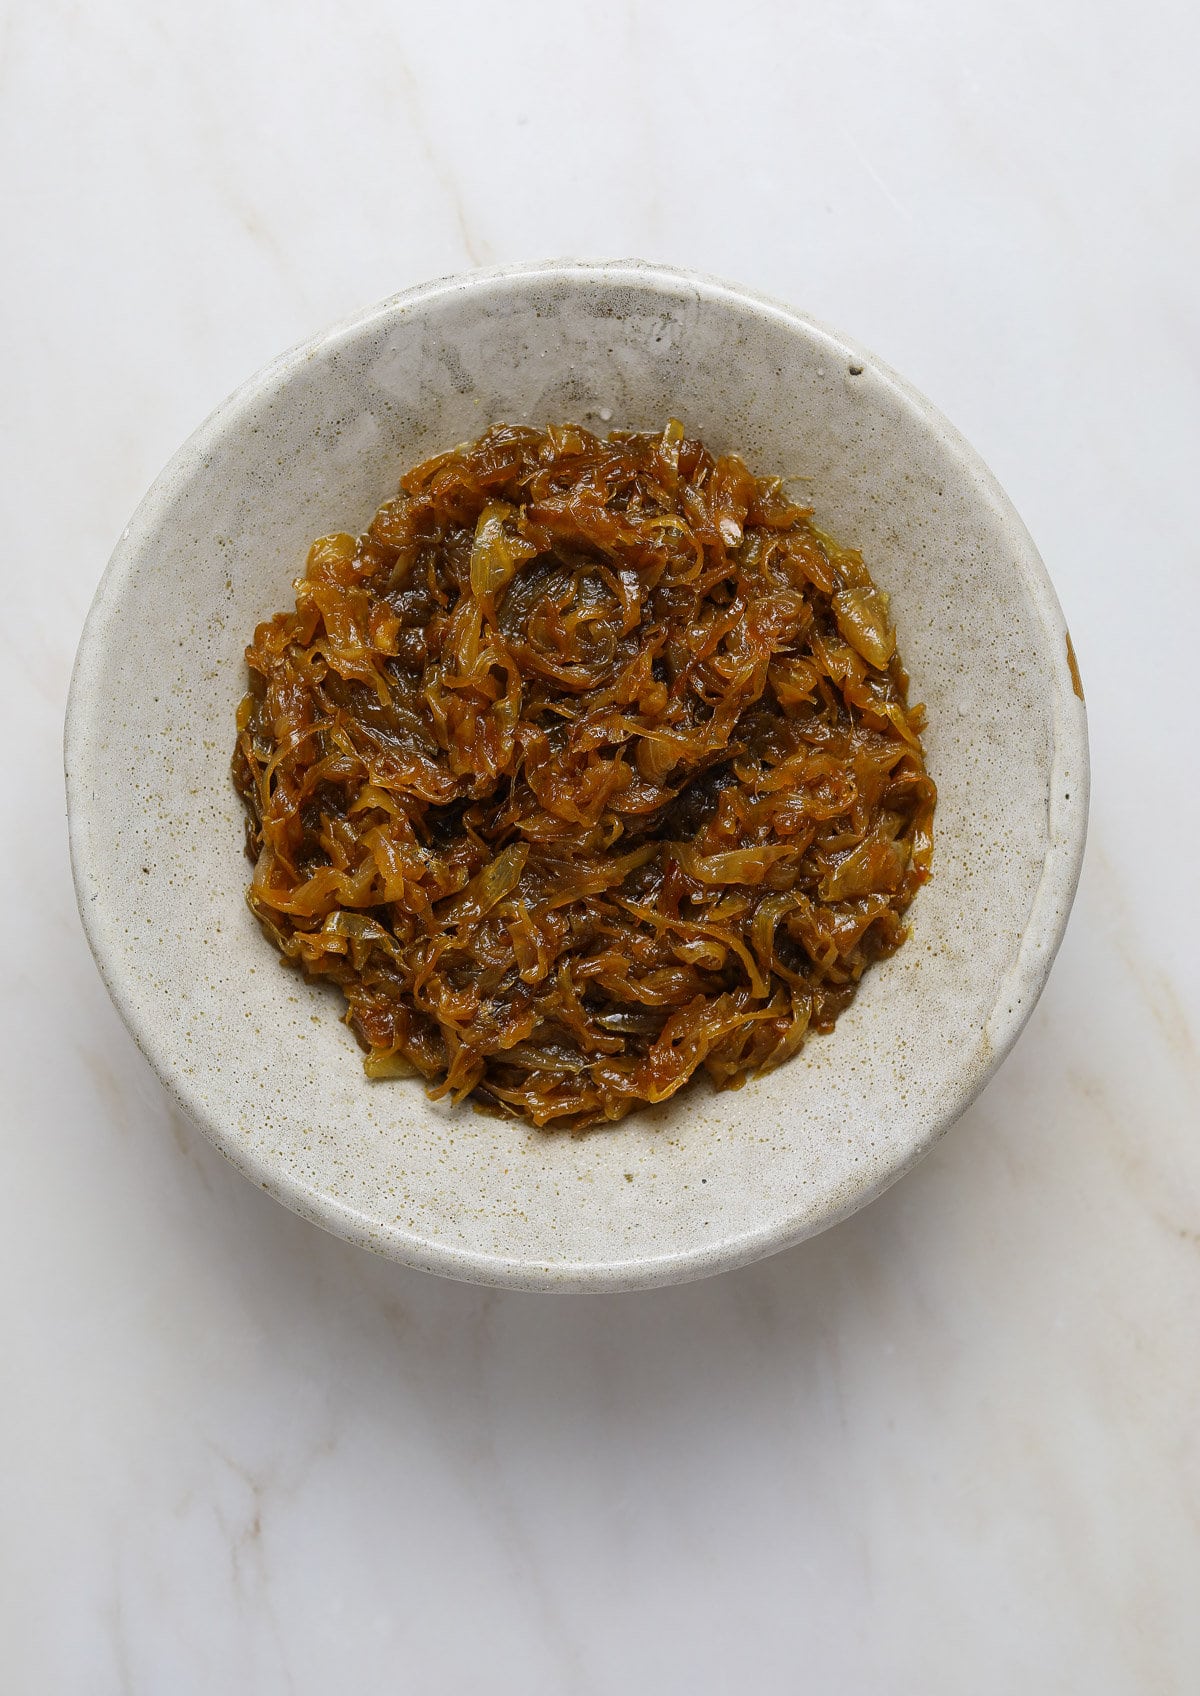 A ceramic bowl of caramelized onions on a marble background.